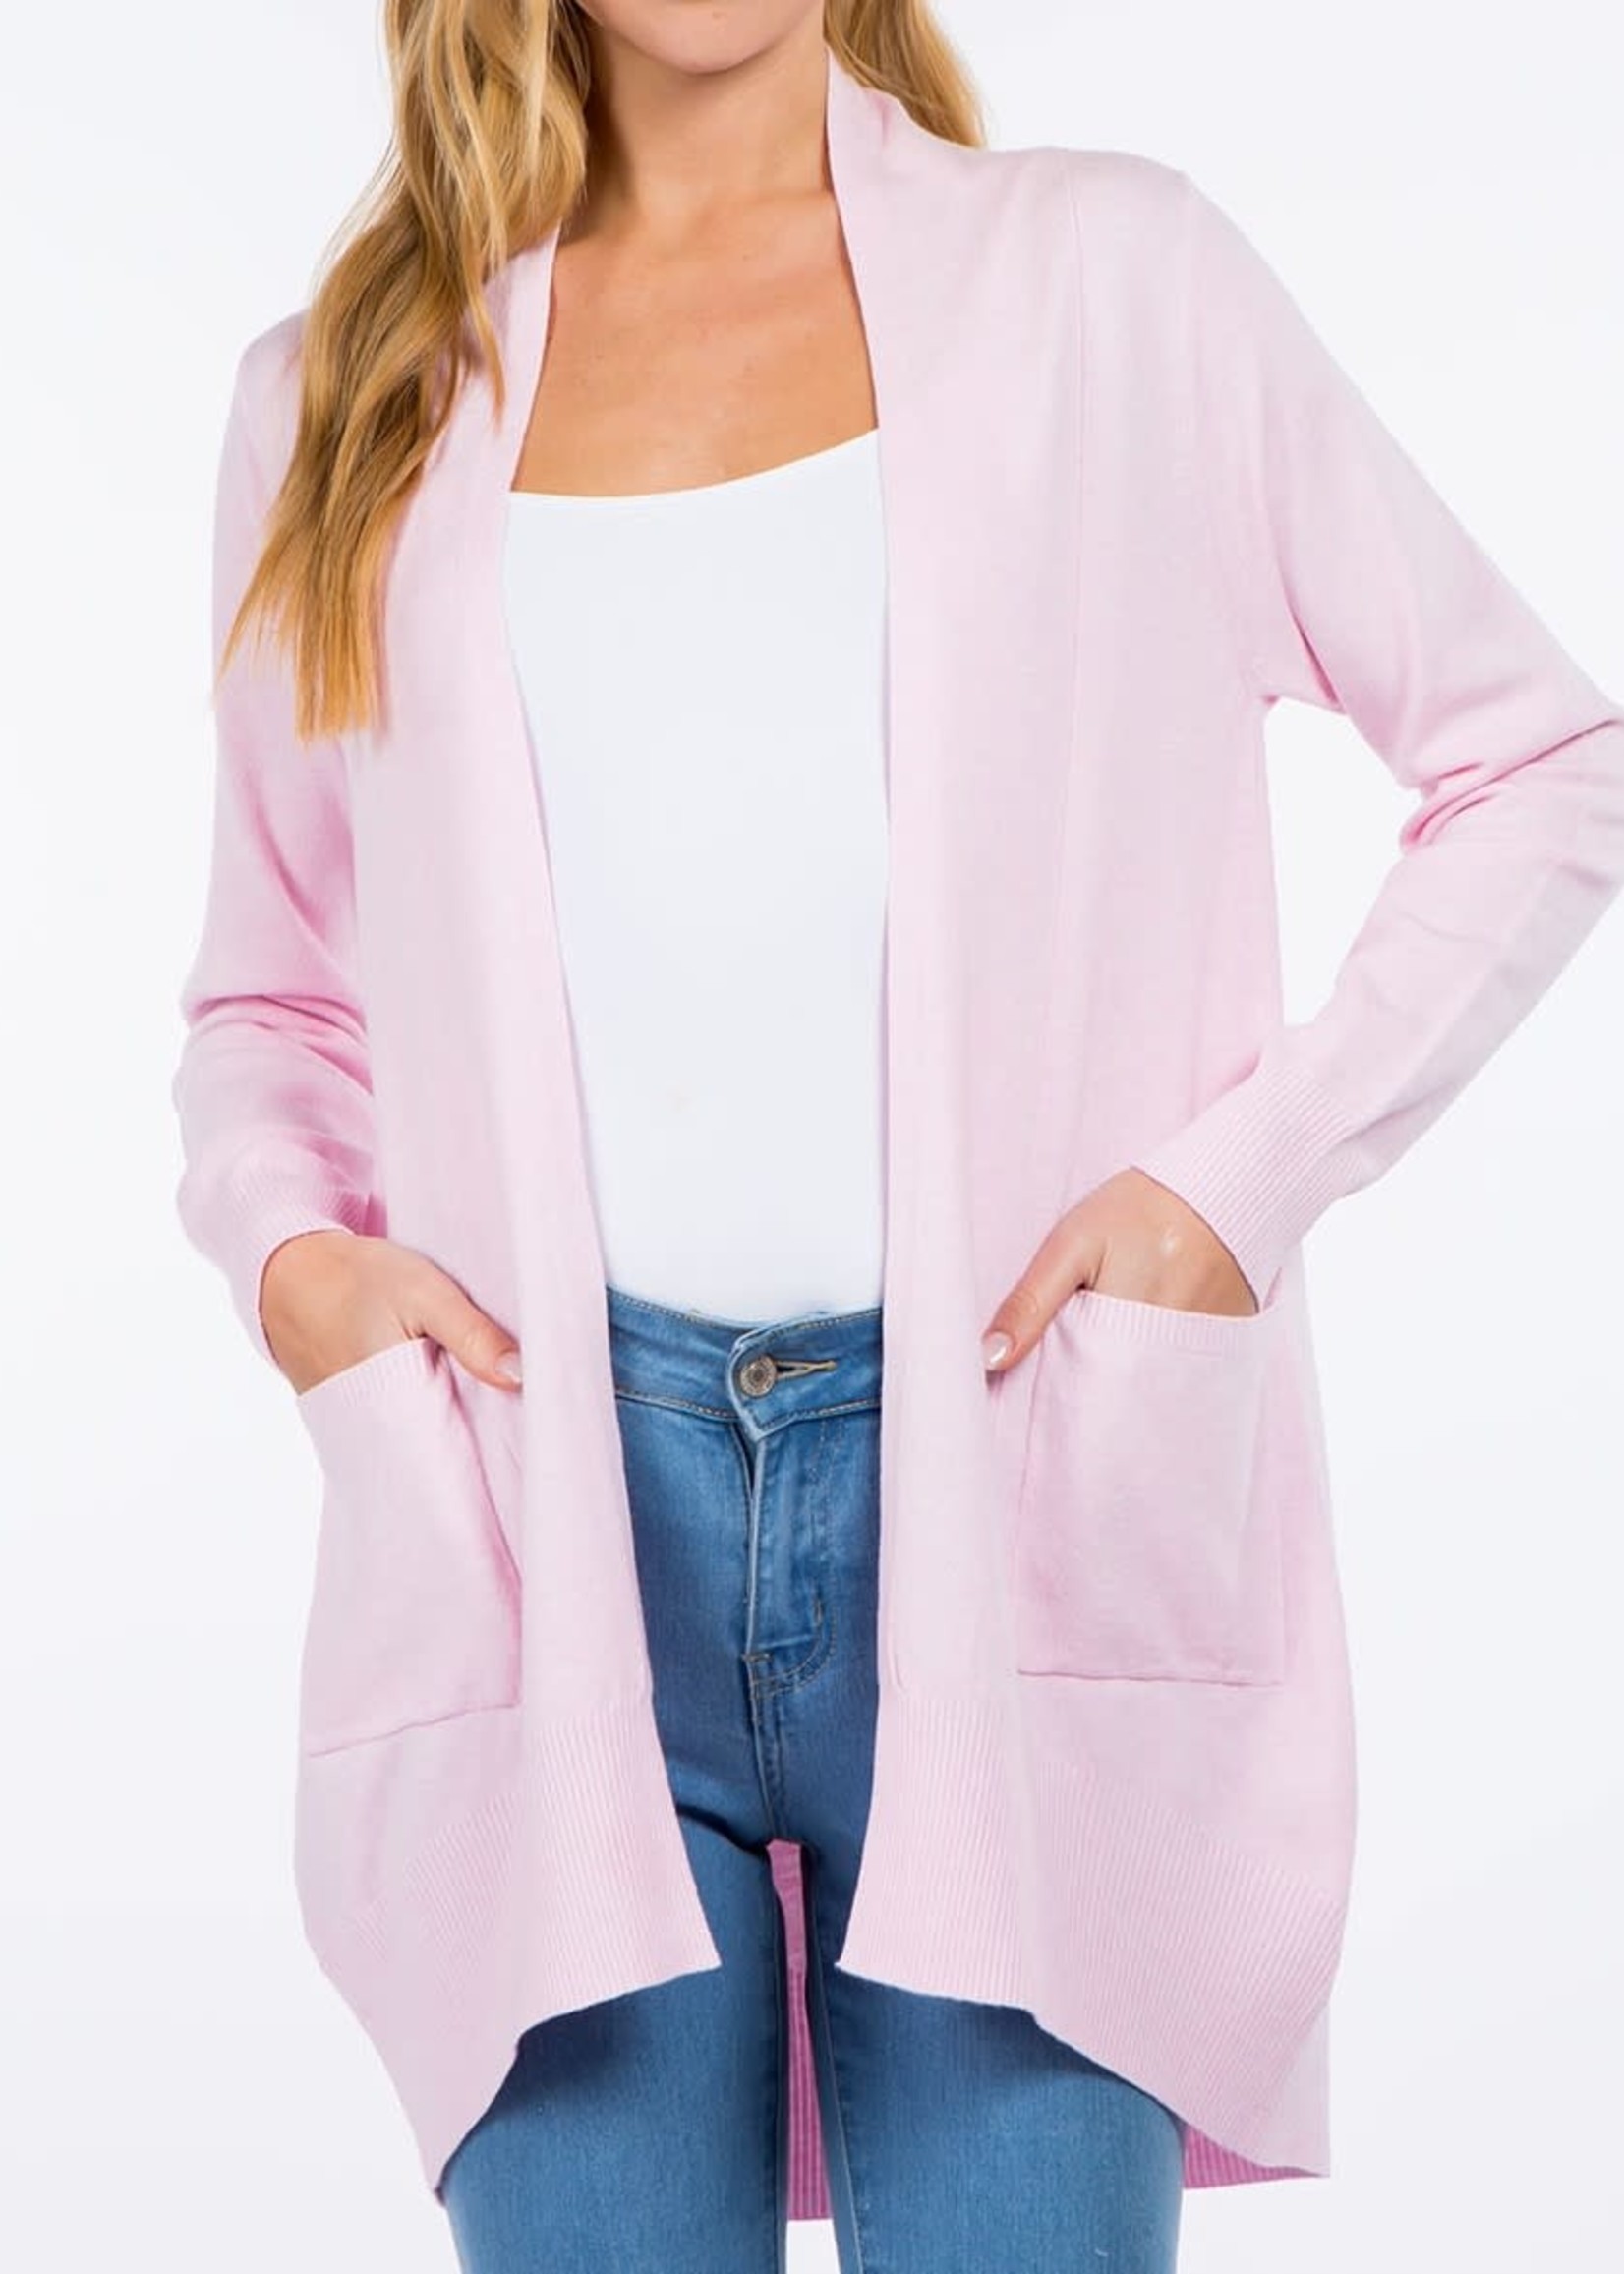 traffic drain locate Light Pink Cardigan - Something New Marketing DBA LouLou's Boutique